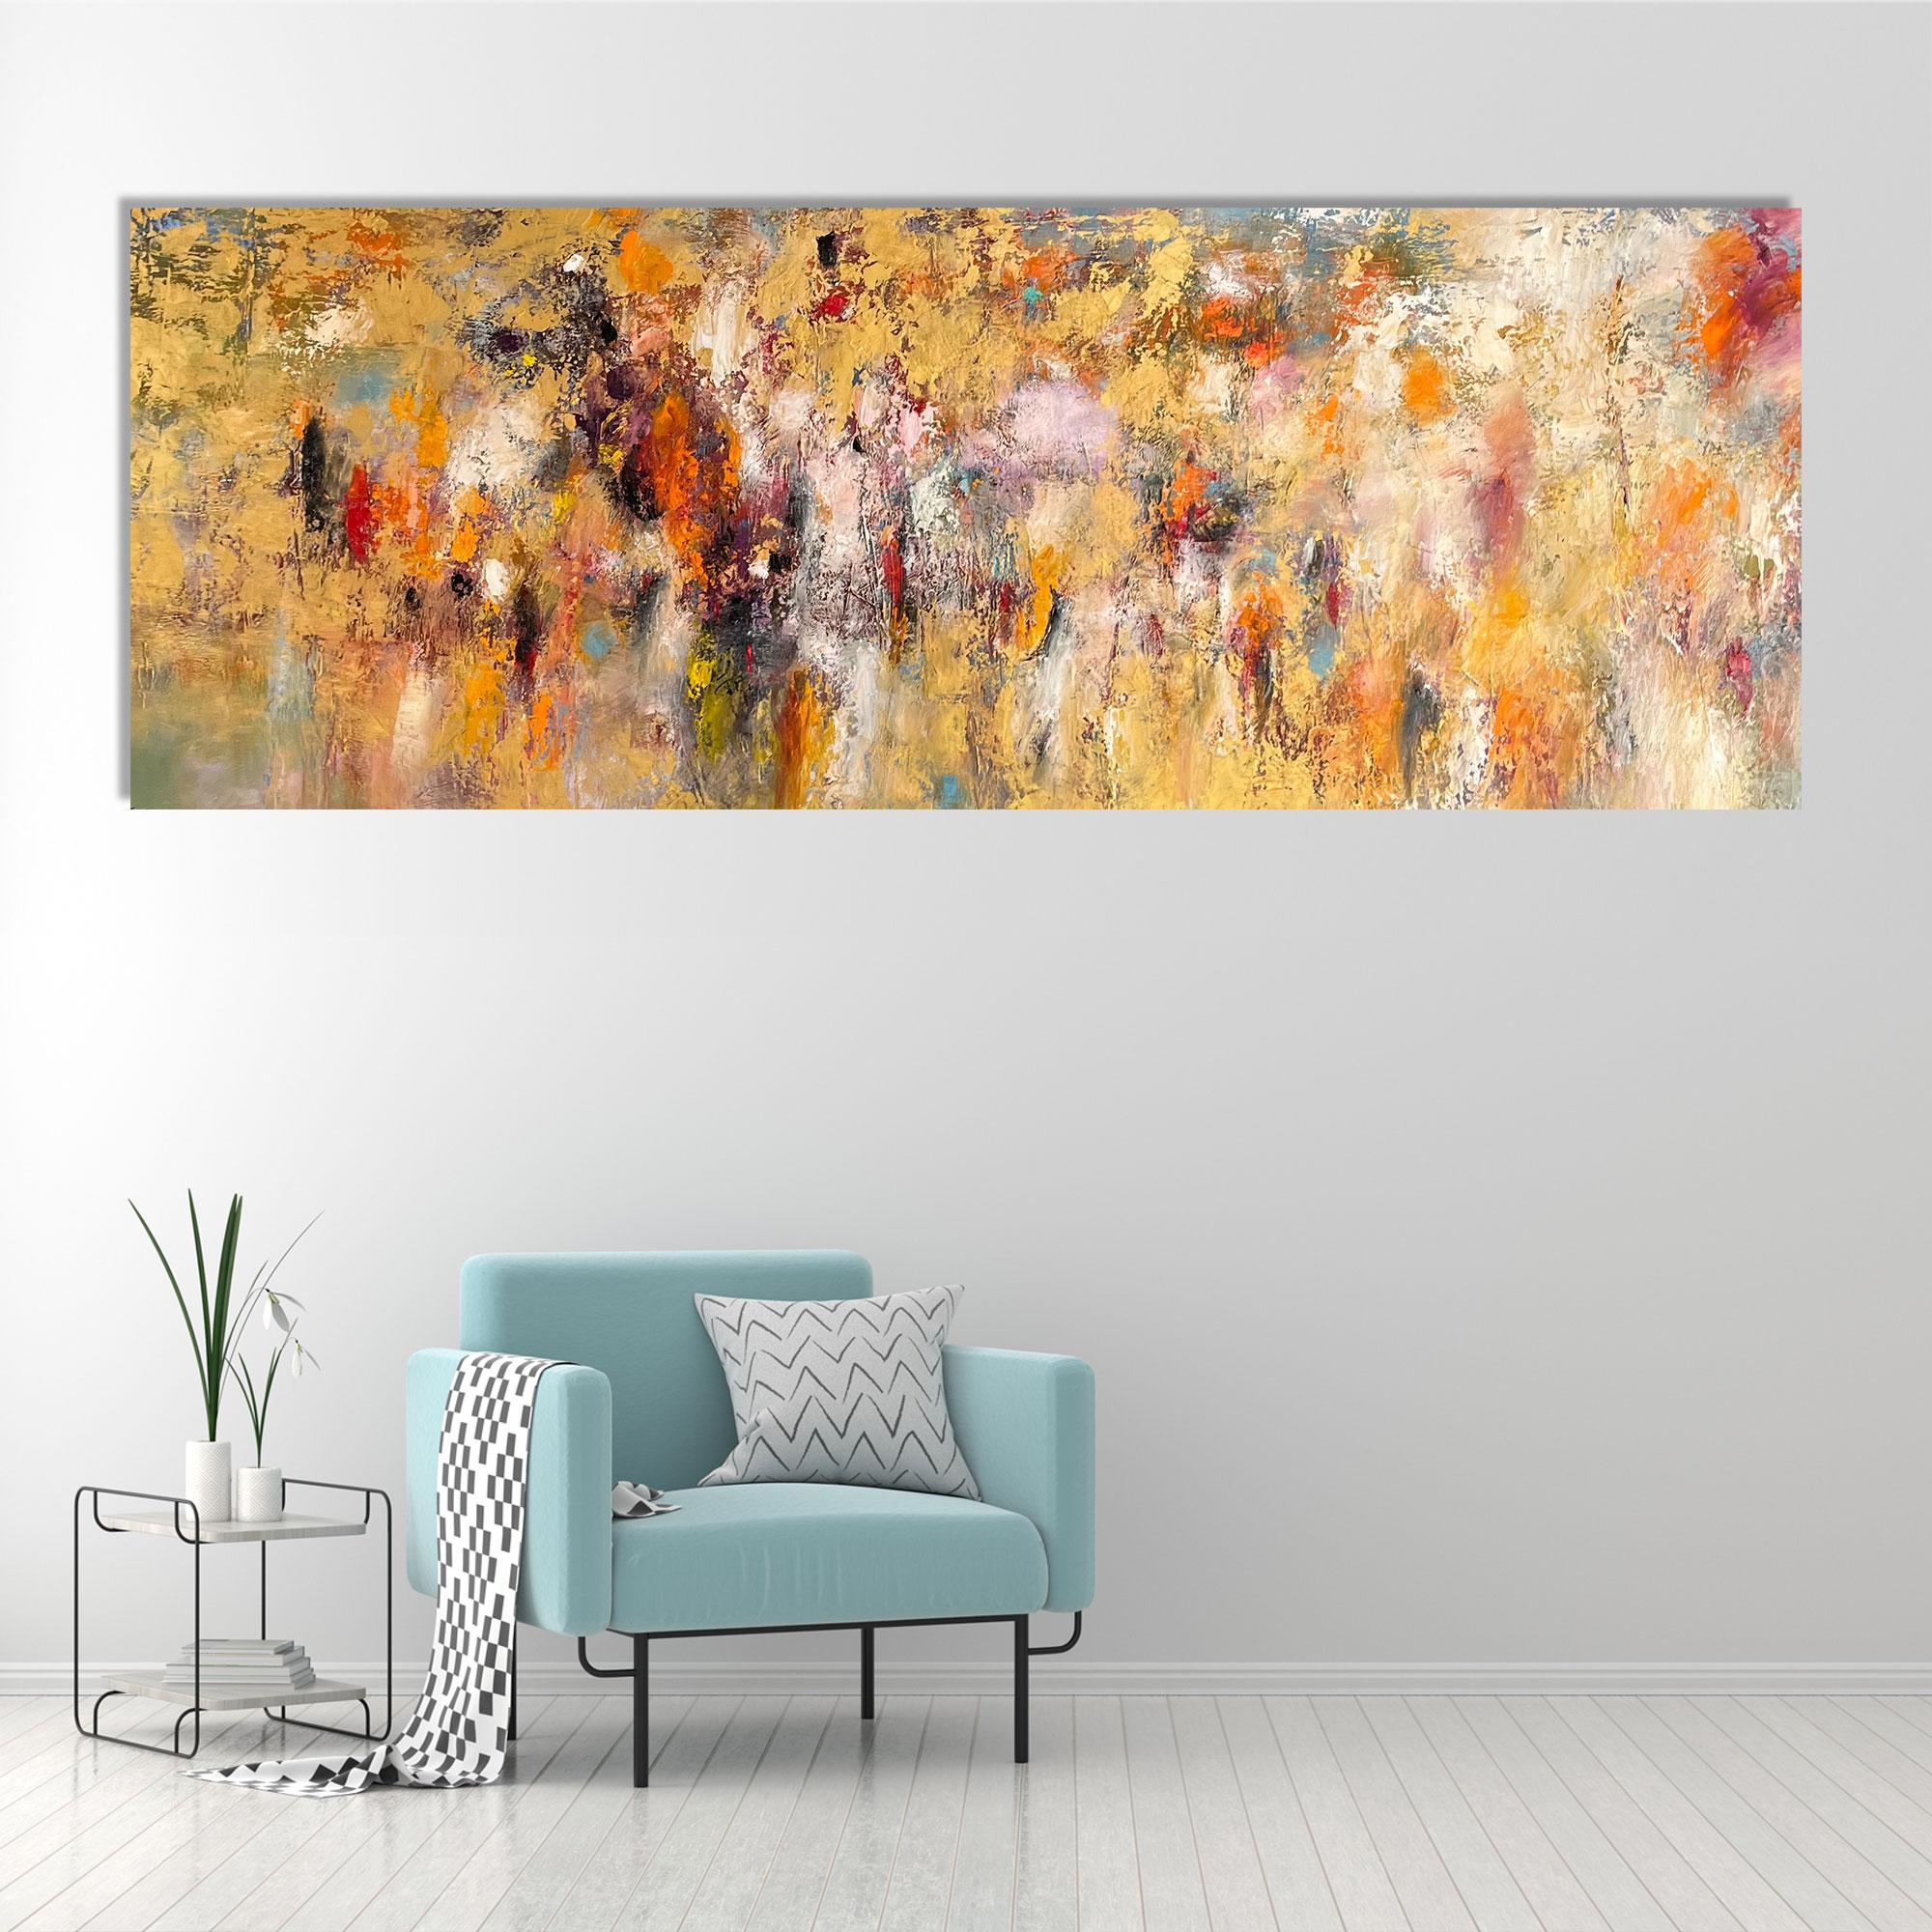 Untitled - Mary Titus - Abstract Painting - Oil On Canvas 1